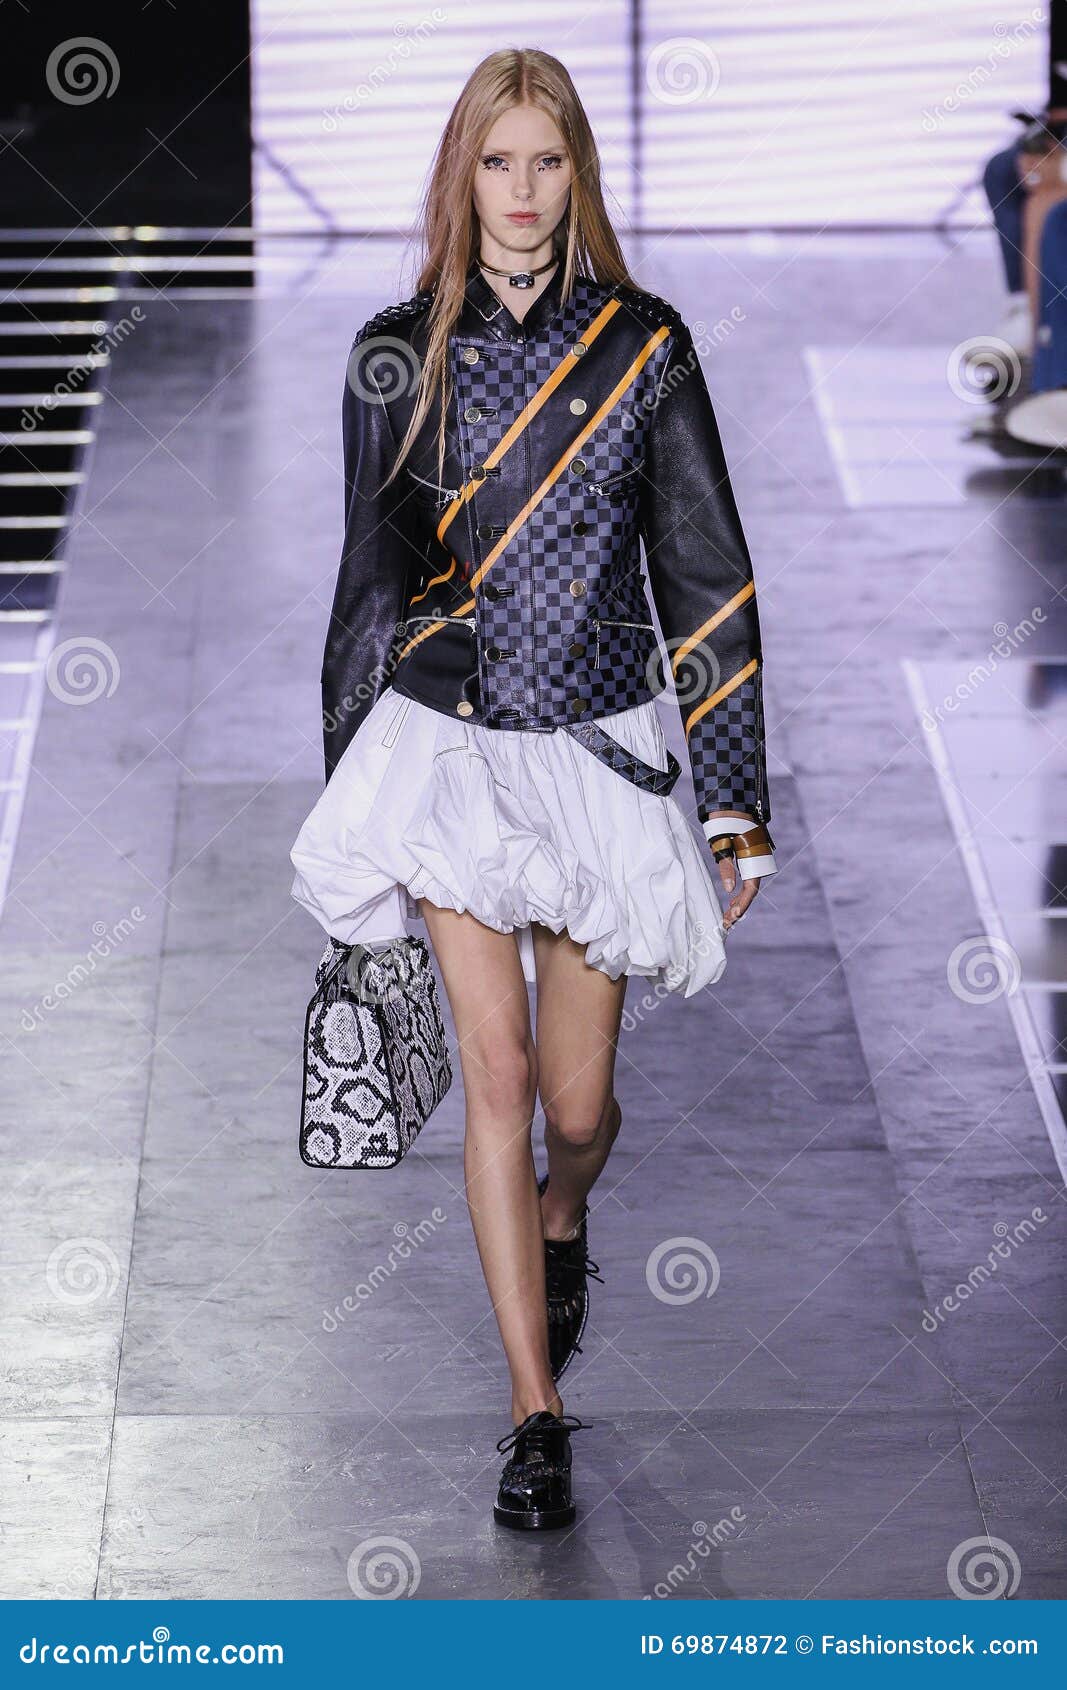 A model walks on the runway at the Louis Vuitton fashion show